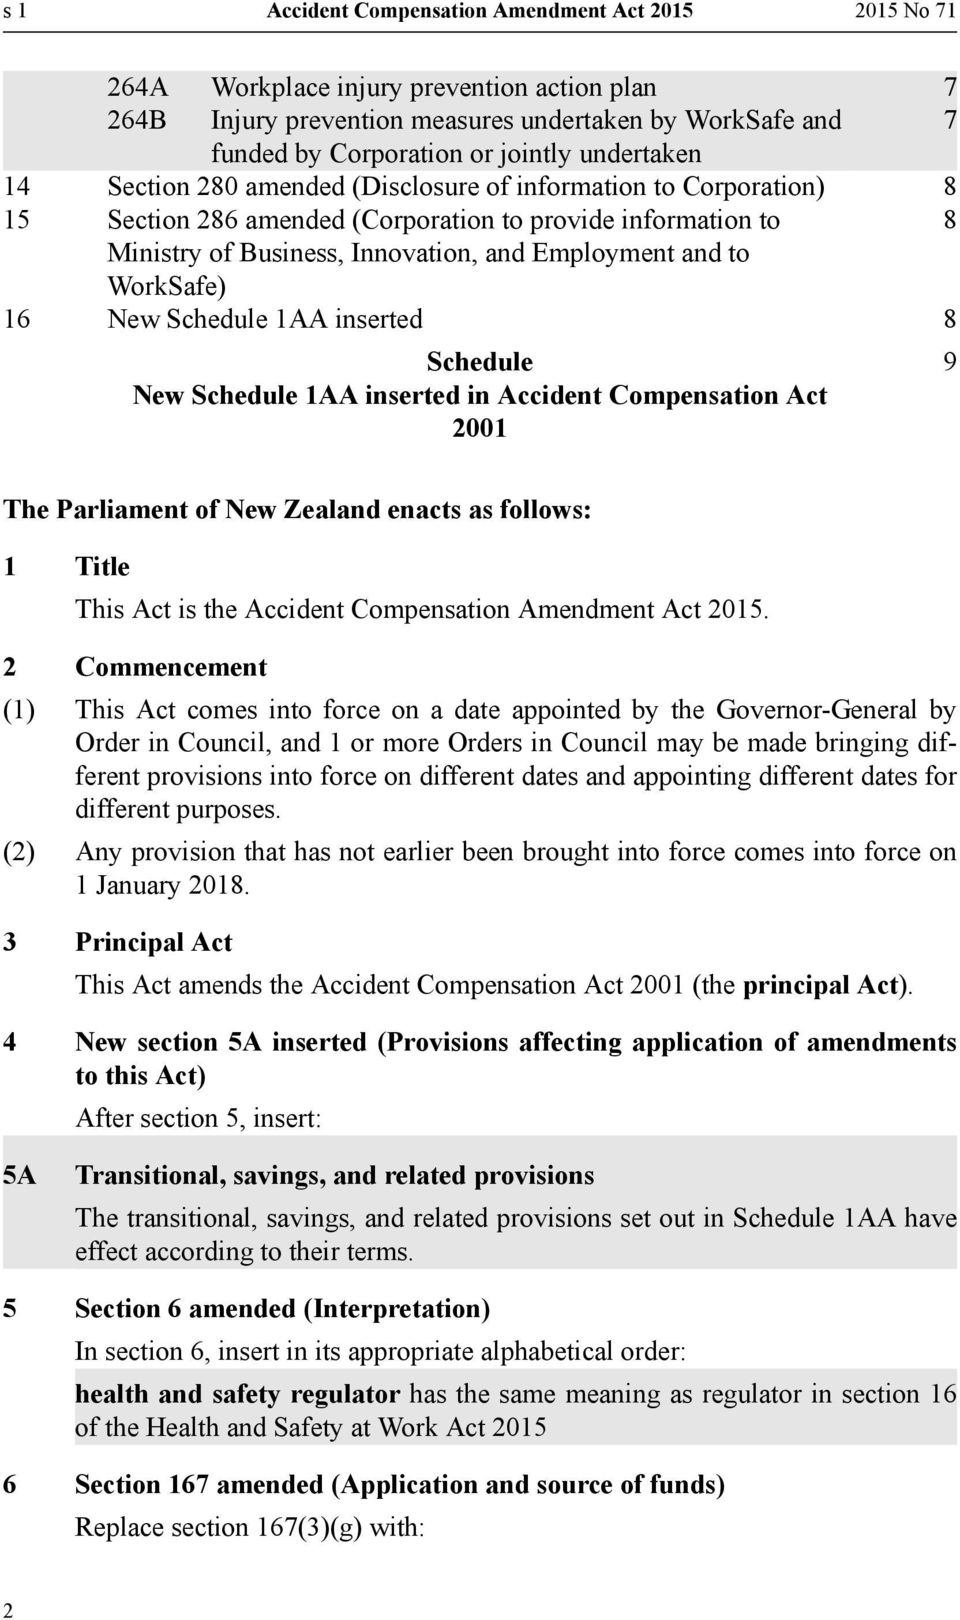 WorkSafe) 16 New Schedule 1AA inserted 8 Schedule New Schedule 1AA inserted in Accident Compensation Act 2001 9 The Parliament of New Zealand enacts as follows: 1 Title This Act is the Accident